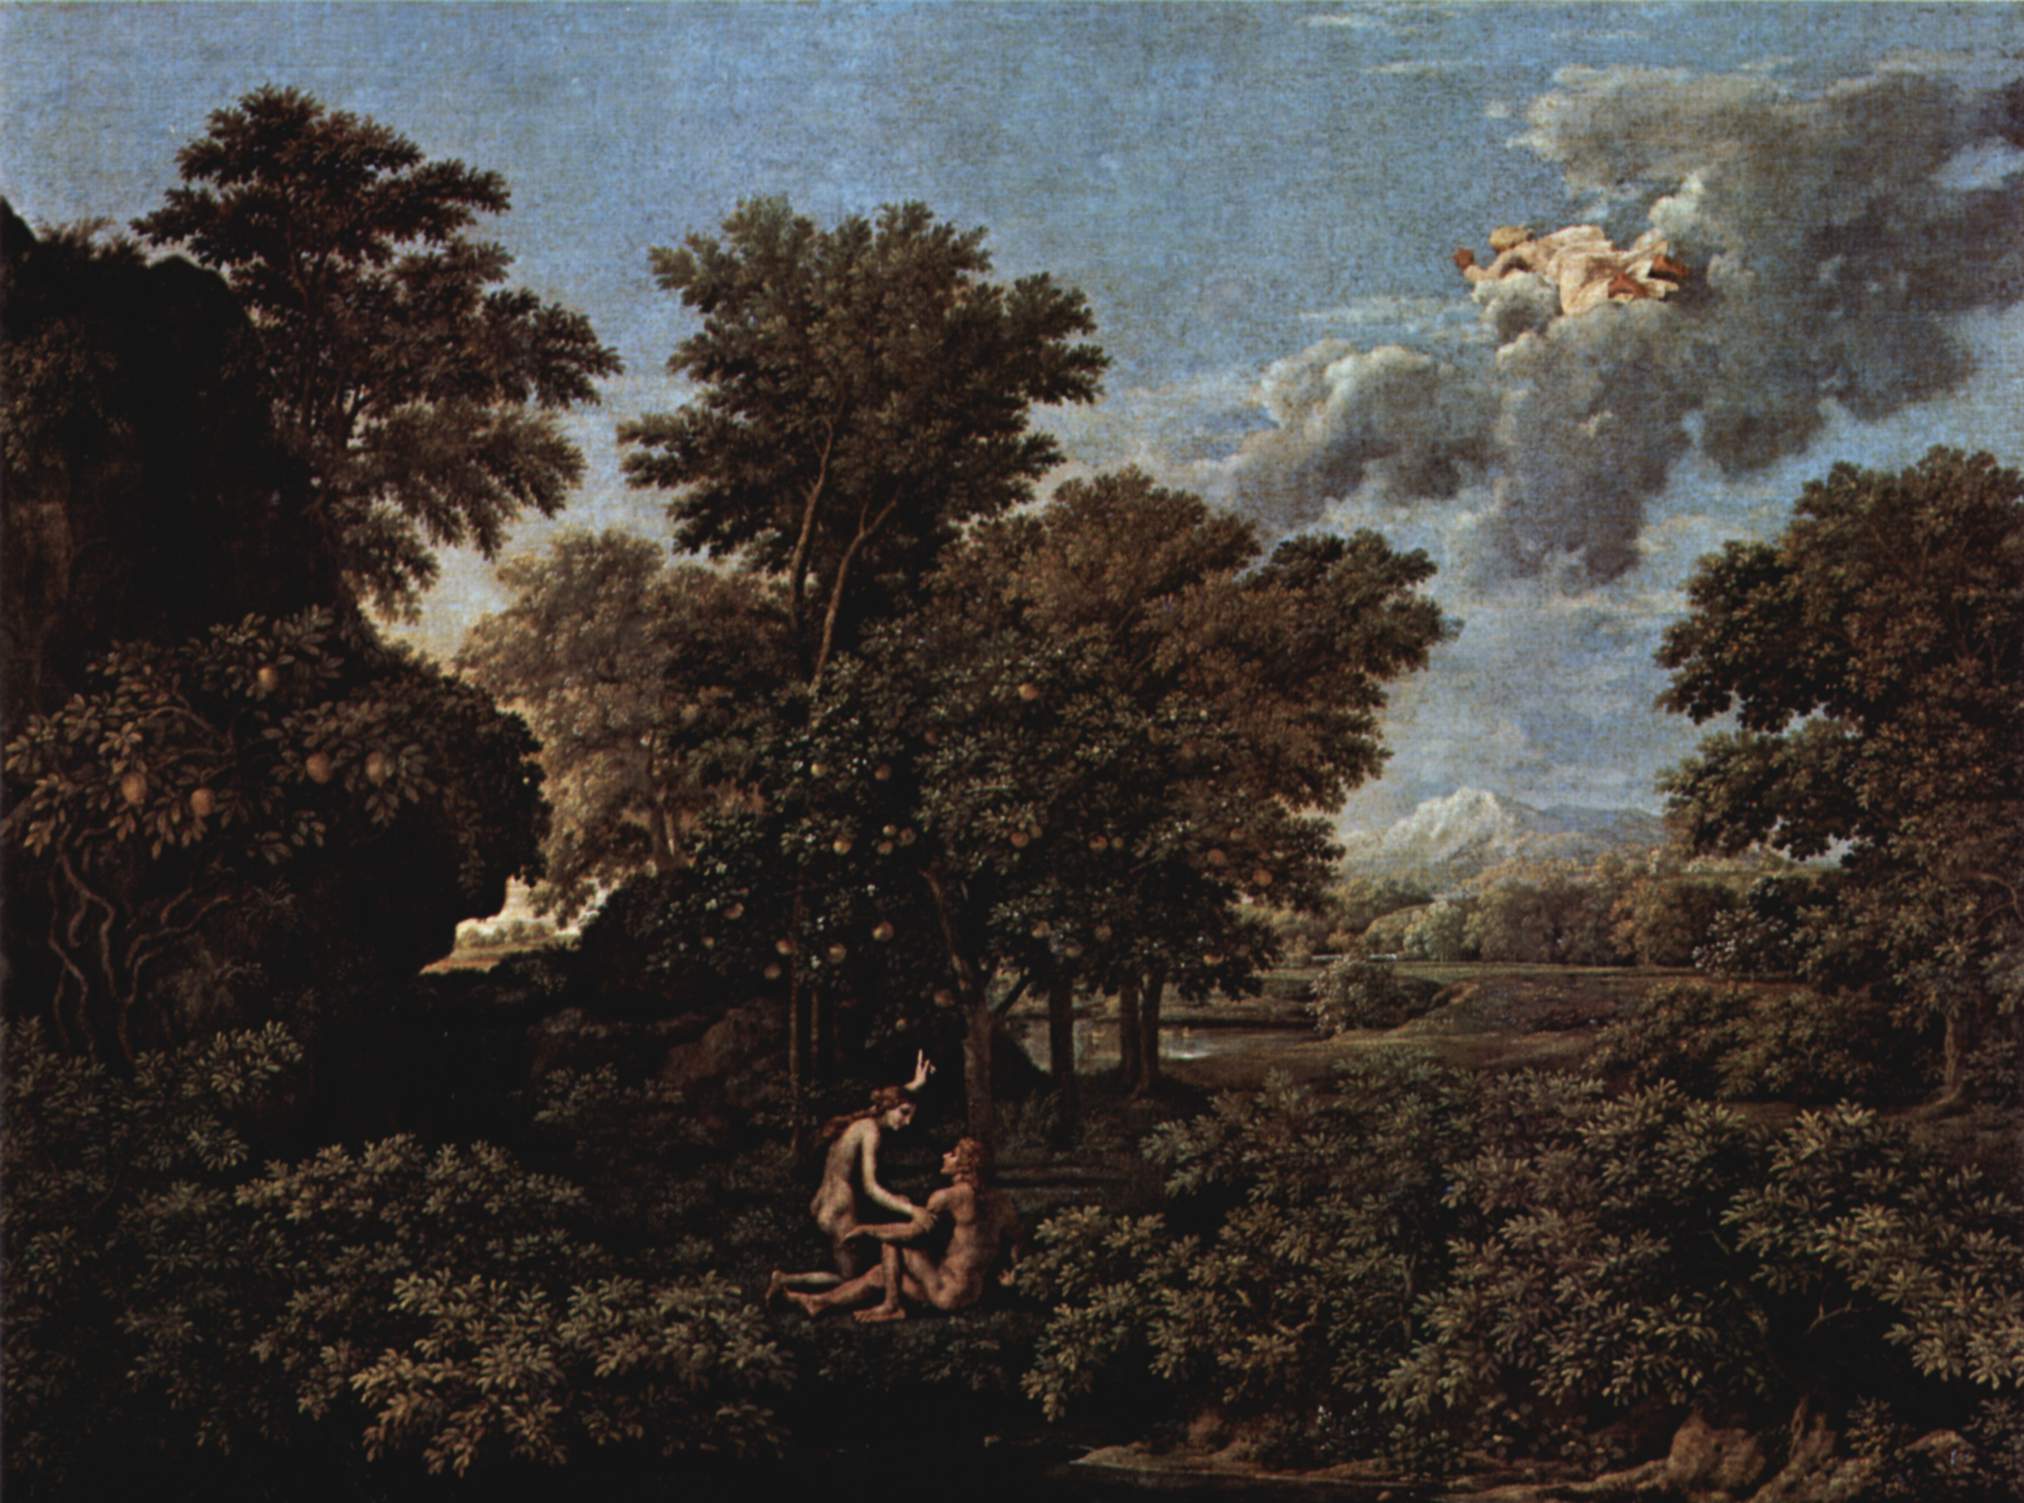 Spring (The Earthly Paradise) by Nicolas Poussin - 1664 - 117 x 160 cm Musée du Louvre